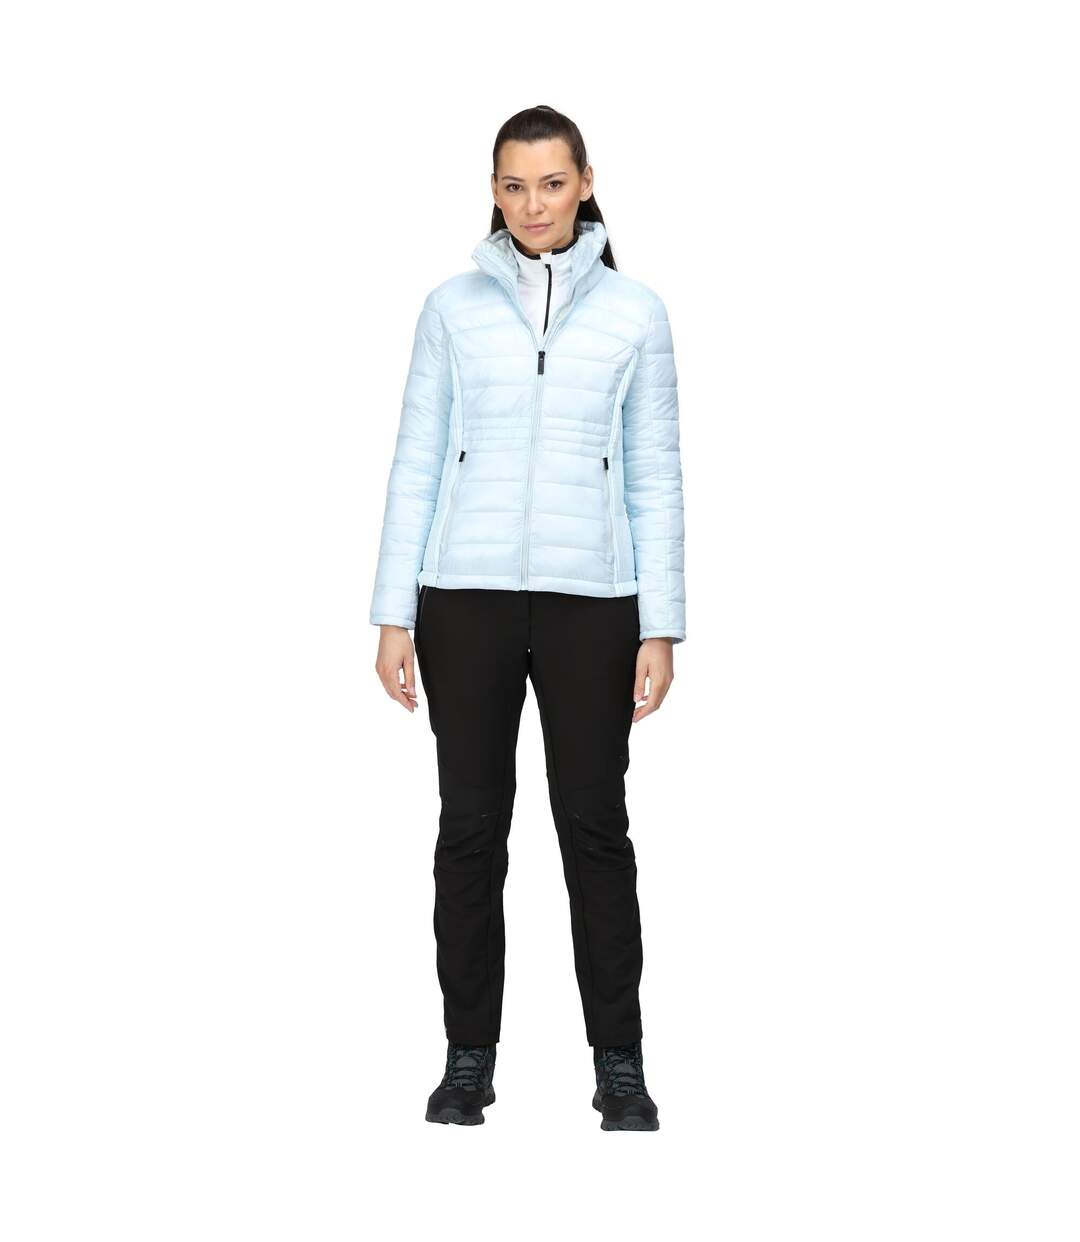 Regatta Womens/Ladies Keava Rochelle Humes Quilted Insulated Jacket (Ice Blue) - UTRG6303